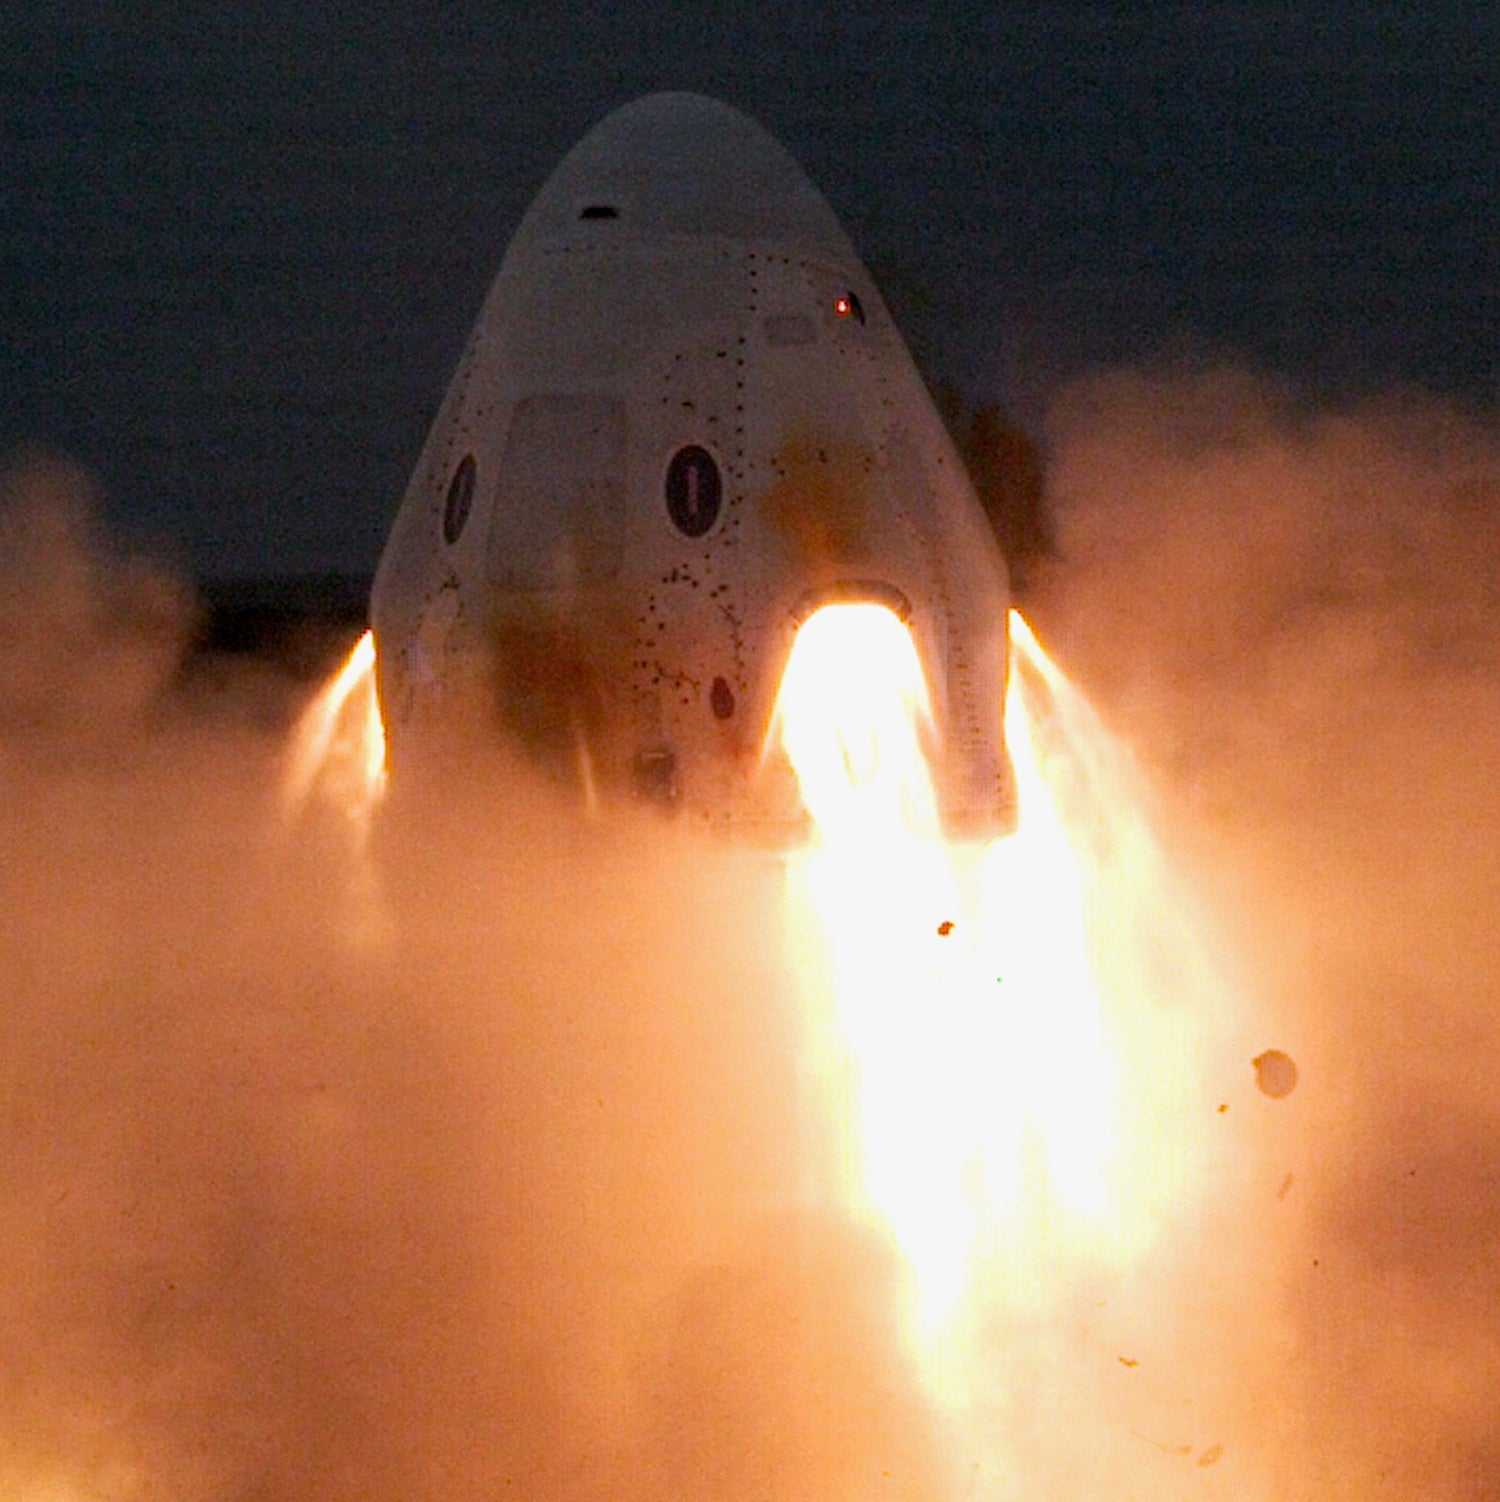 SpaceX Crew Dragon: SuperDraco engines successful test fire